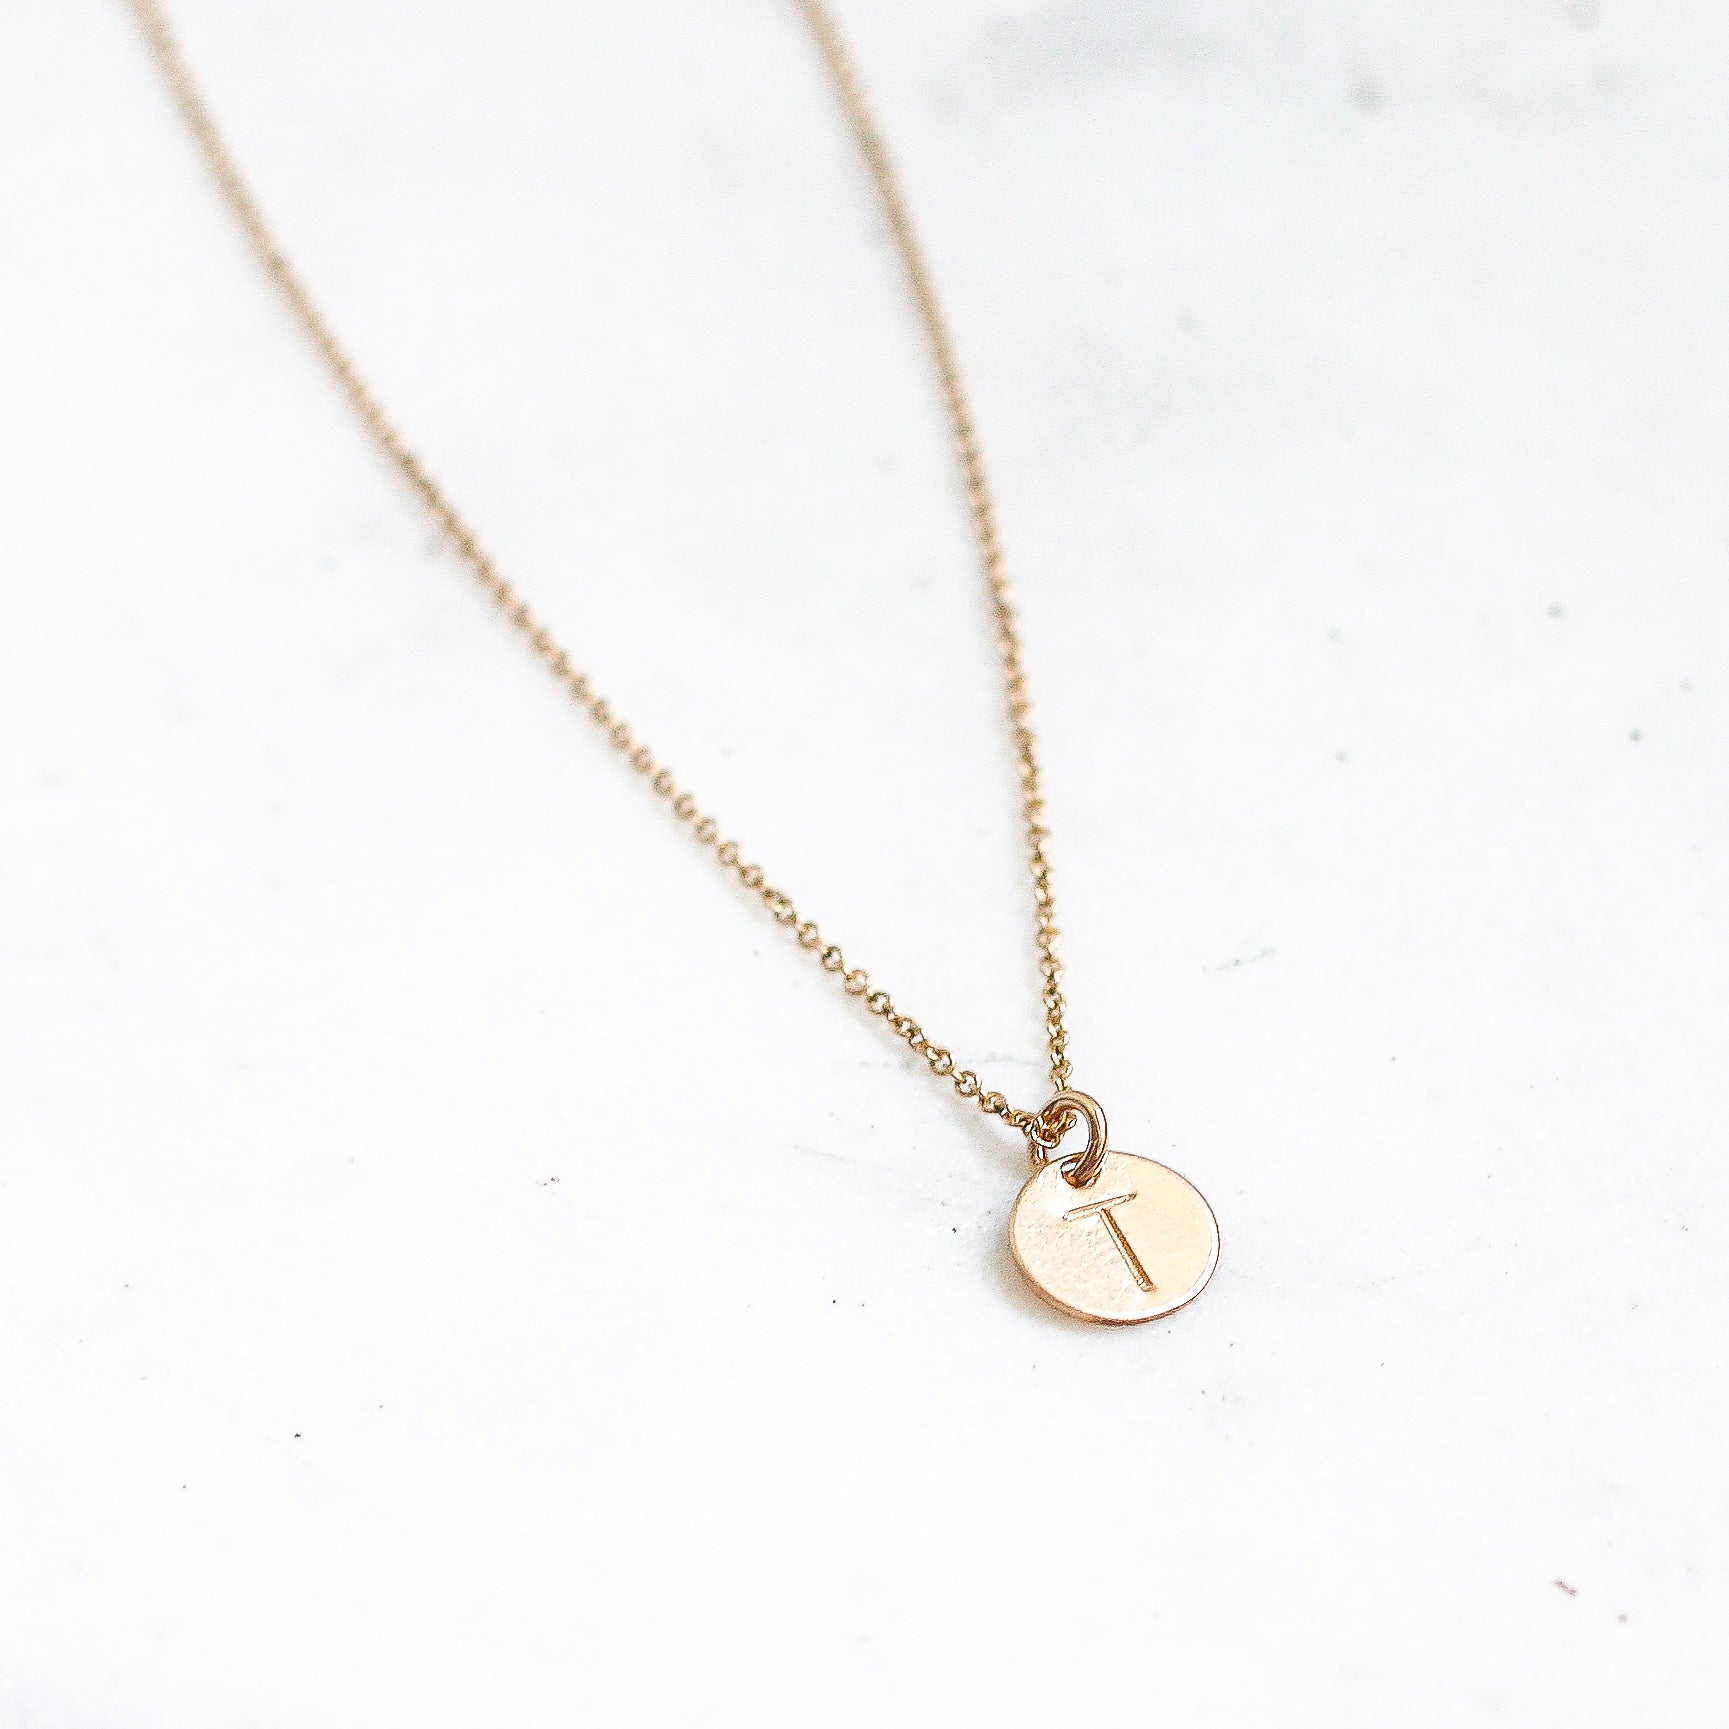 Mini Disc Initial Charm Necklace | Handmade Disc Necklace in Silver or Gold  | Hand-stamped Initial Necklace | Delicate Gold Disc Necklace